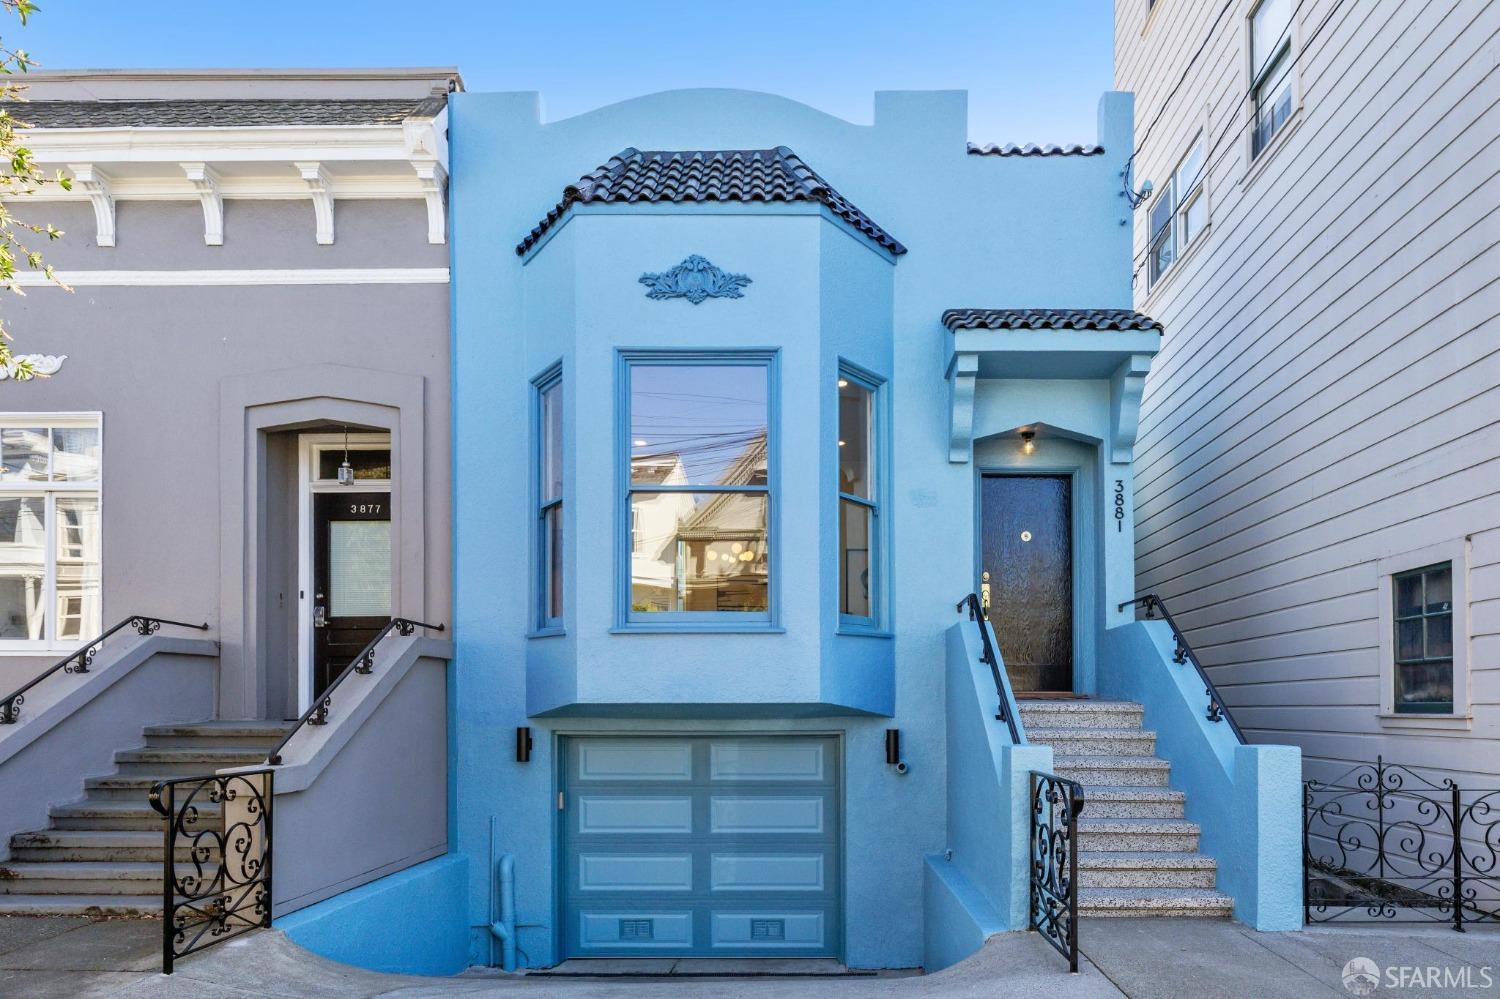 Photo of 3881 Cesar Chavez St in San Francisco, CA